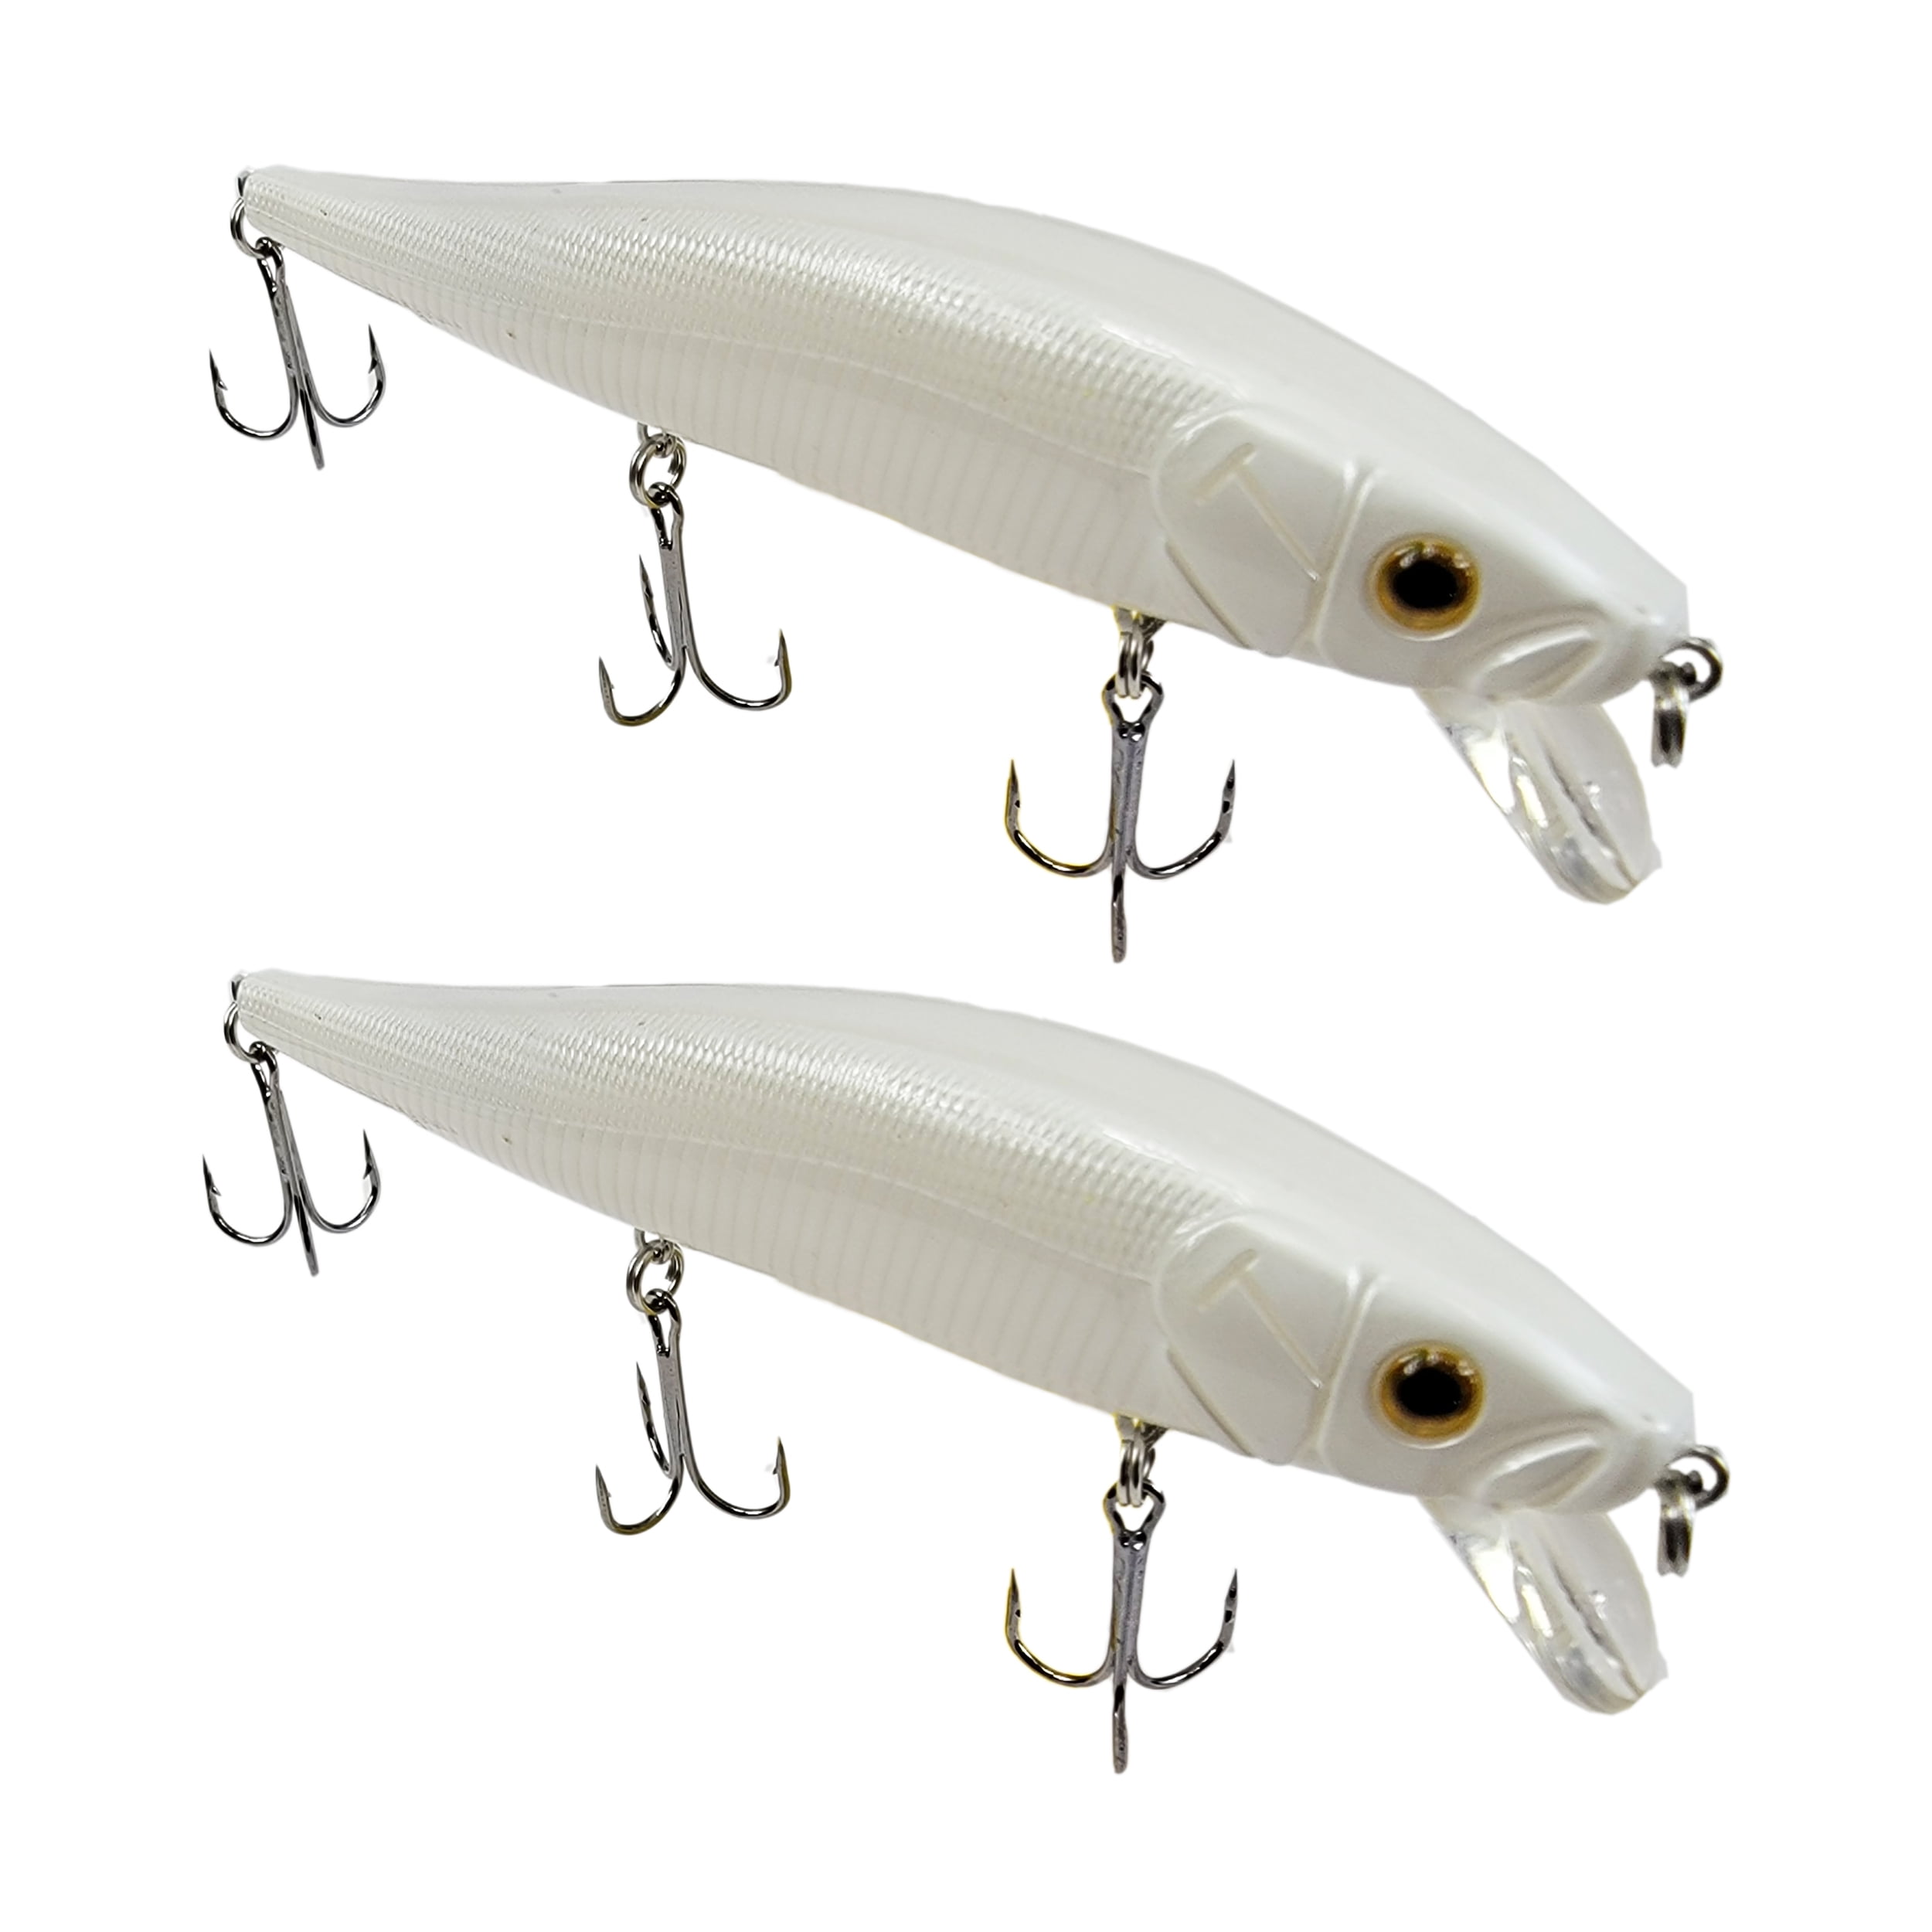 Tackle HD 2-Pack Fiddle-Styx Jerkbait, 4 3/8 x 9/16 Suspending Jerk  Baits, Freshwater or Saltwater Fishing Lures, Trout, Crappie, Walleye, or  Bass Lures, Gold OB Black Back 